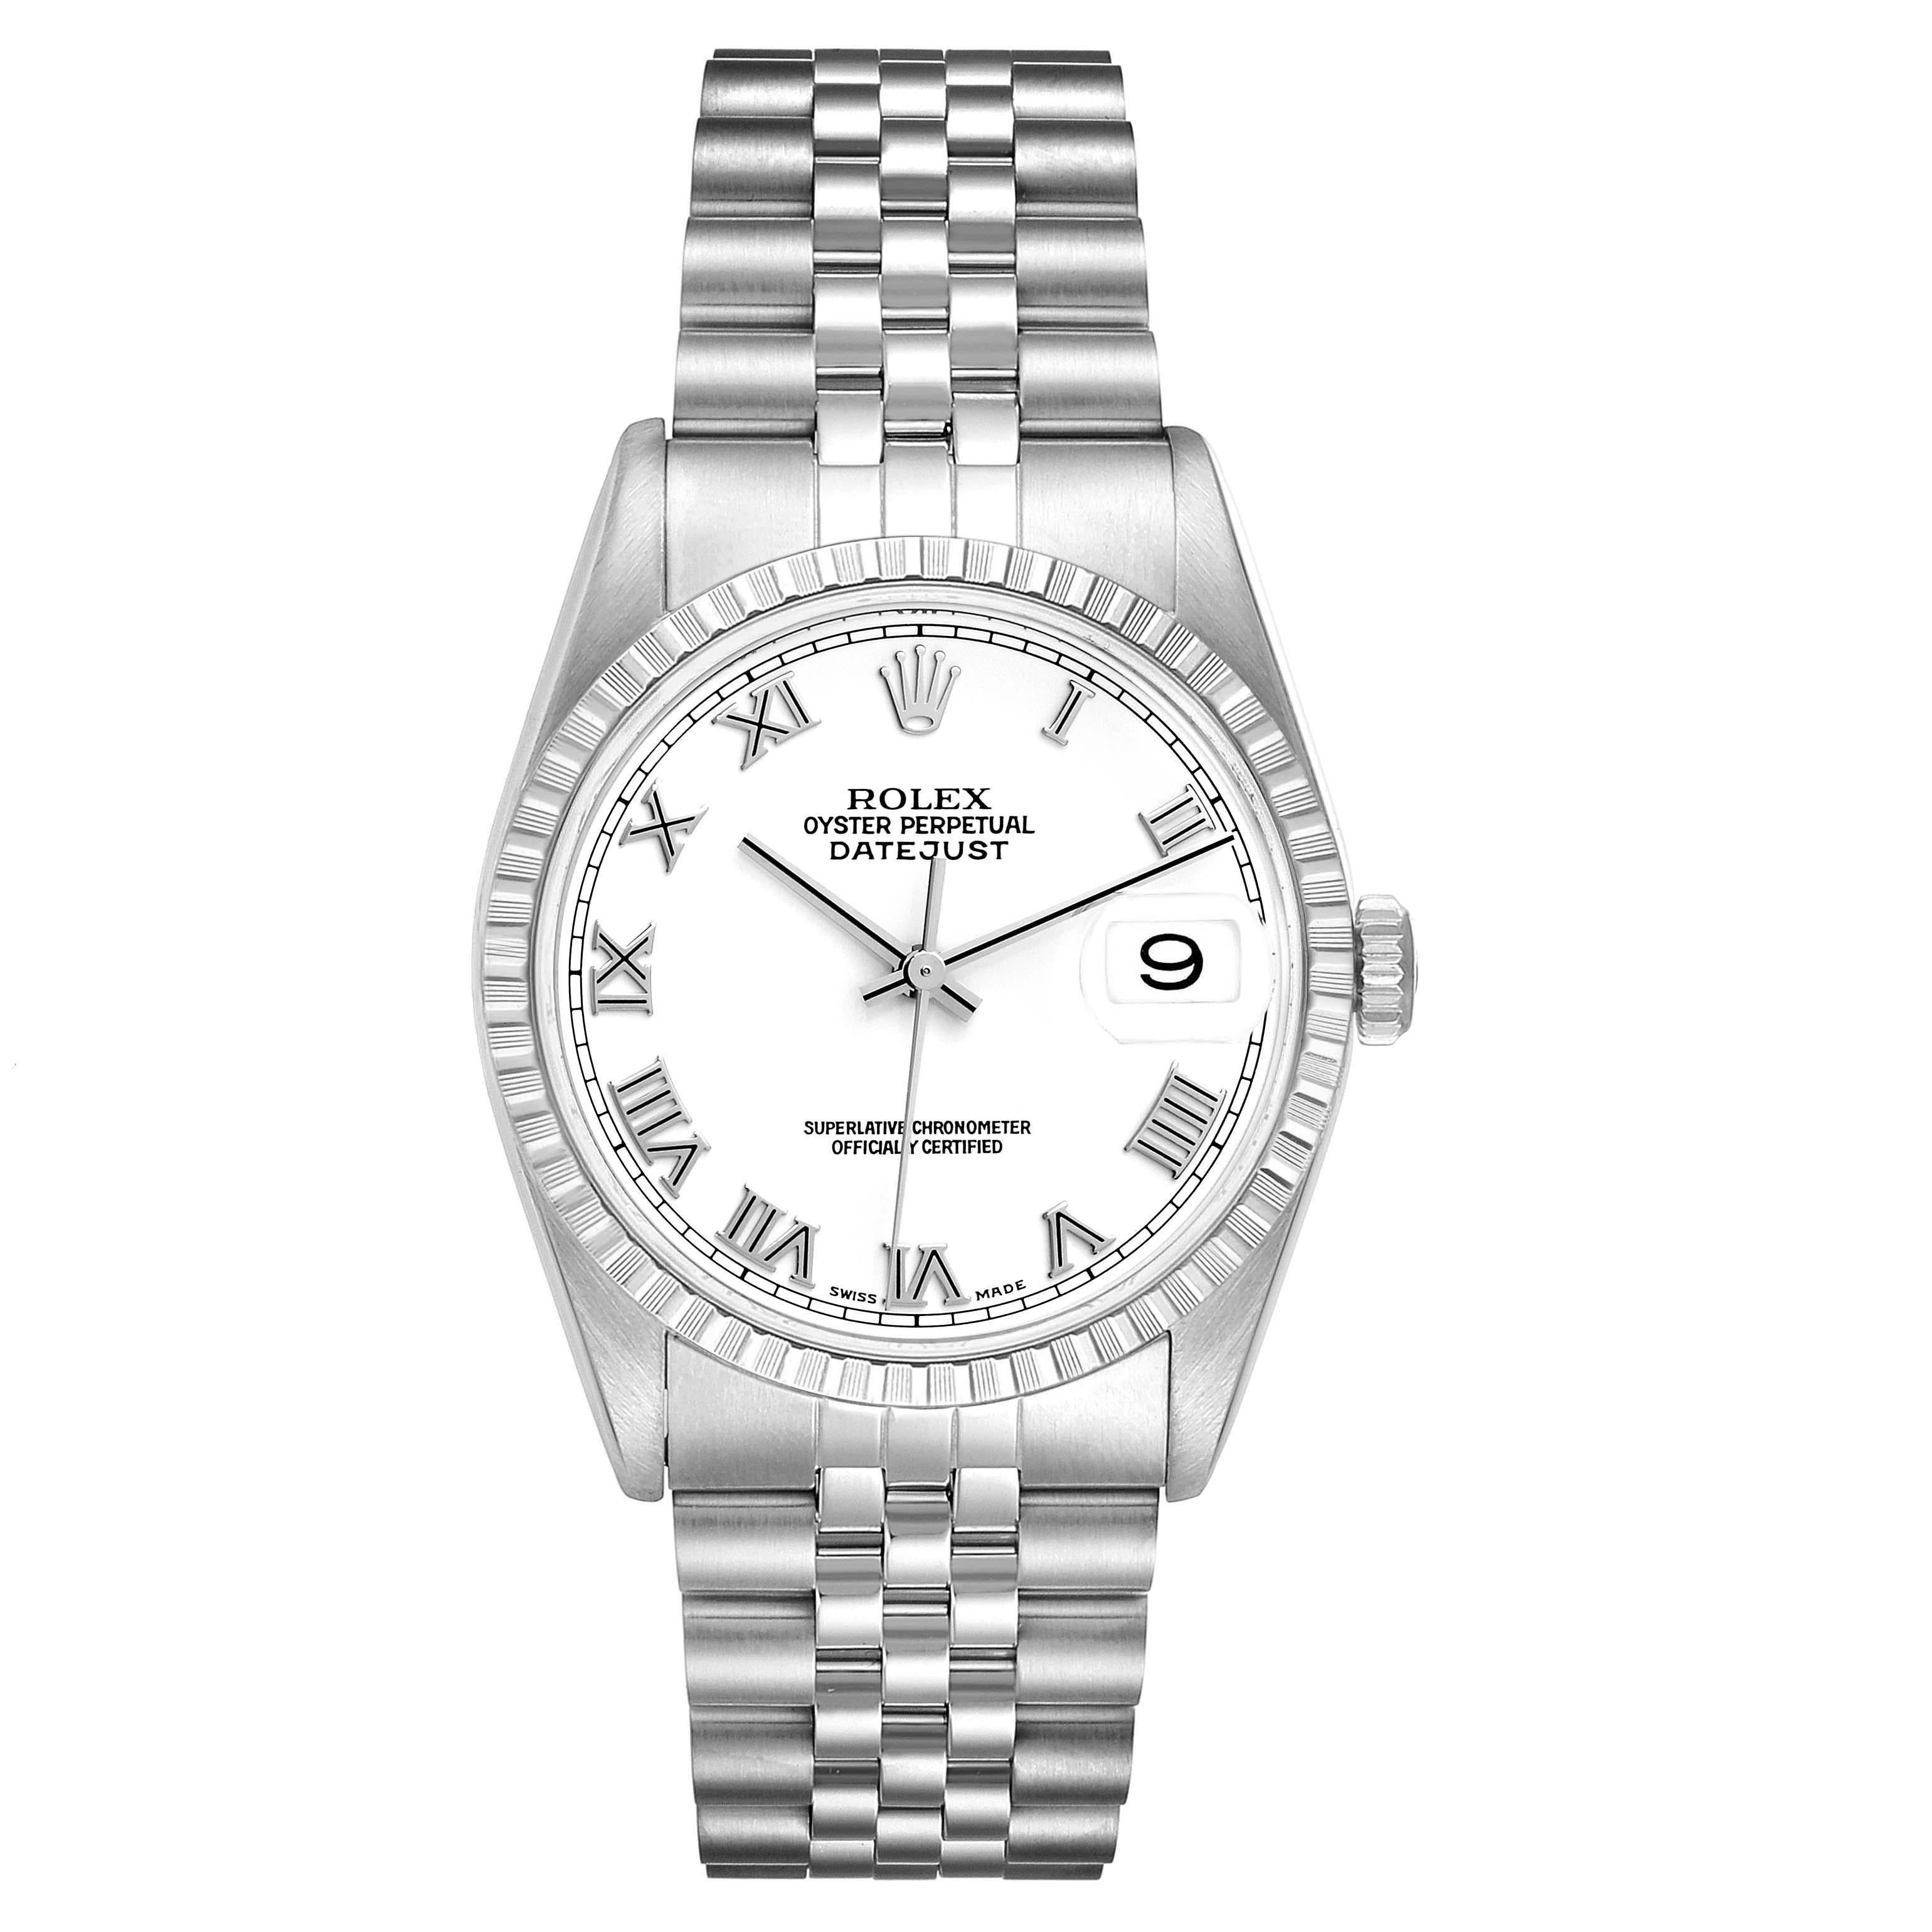 Rolex Datejust 36 White Roman Dial Steel Mens Watch 16220. Officially certified chronometer automatic self-winding movement. Stainless steel oyster case 36.0 mm in diameter. Rolex logo on a crown. Stainless steel engine turned bezel. Scratch